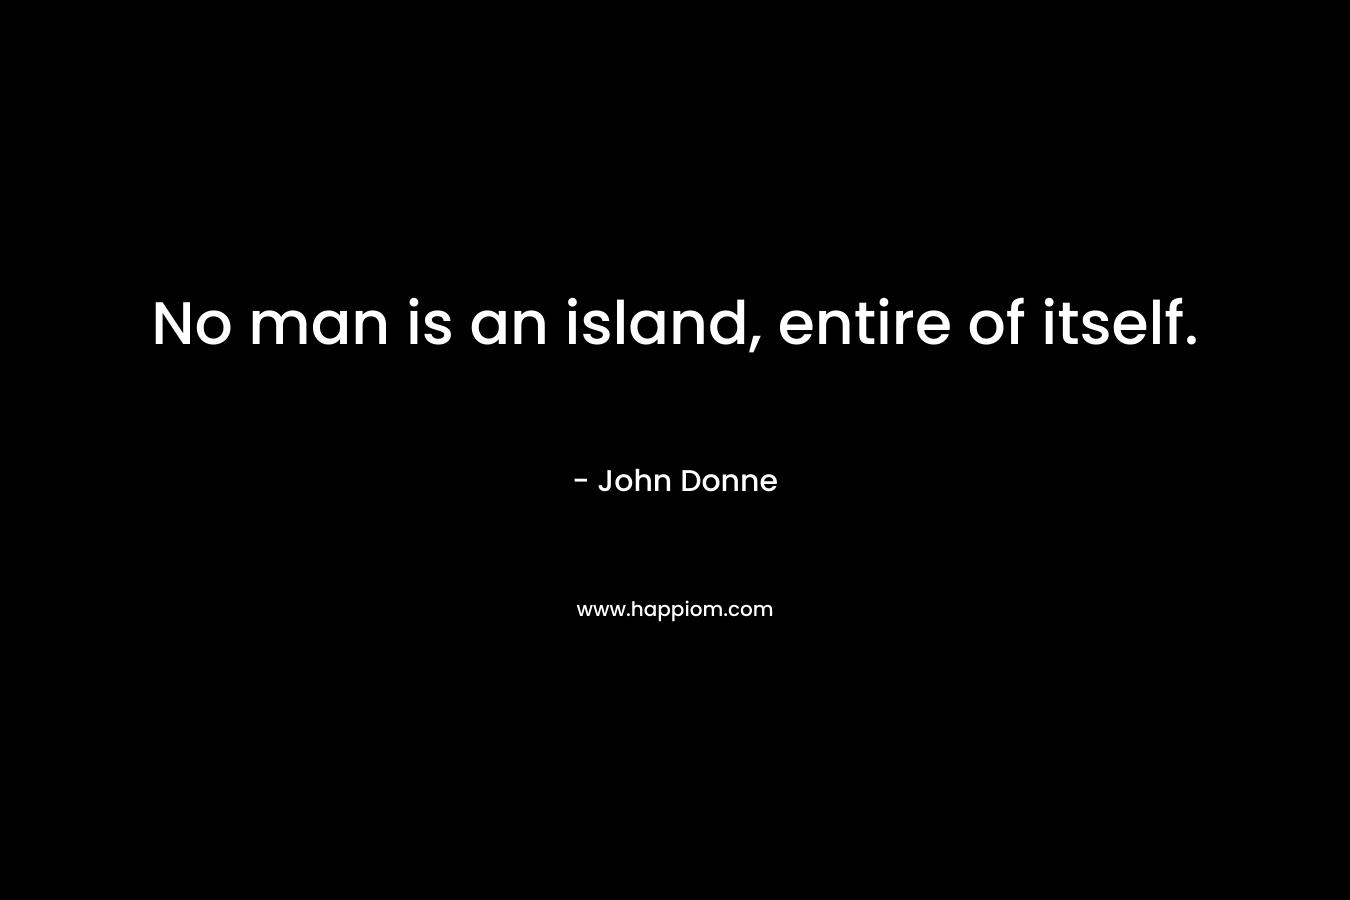 No man is an island, entire of itself.